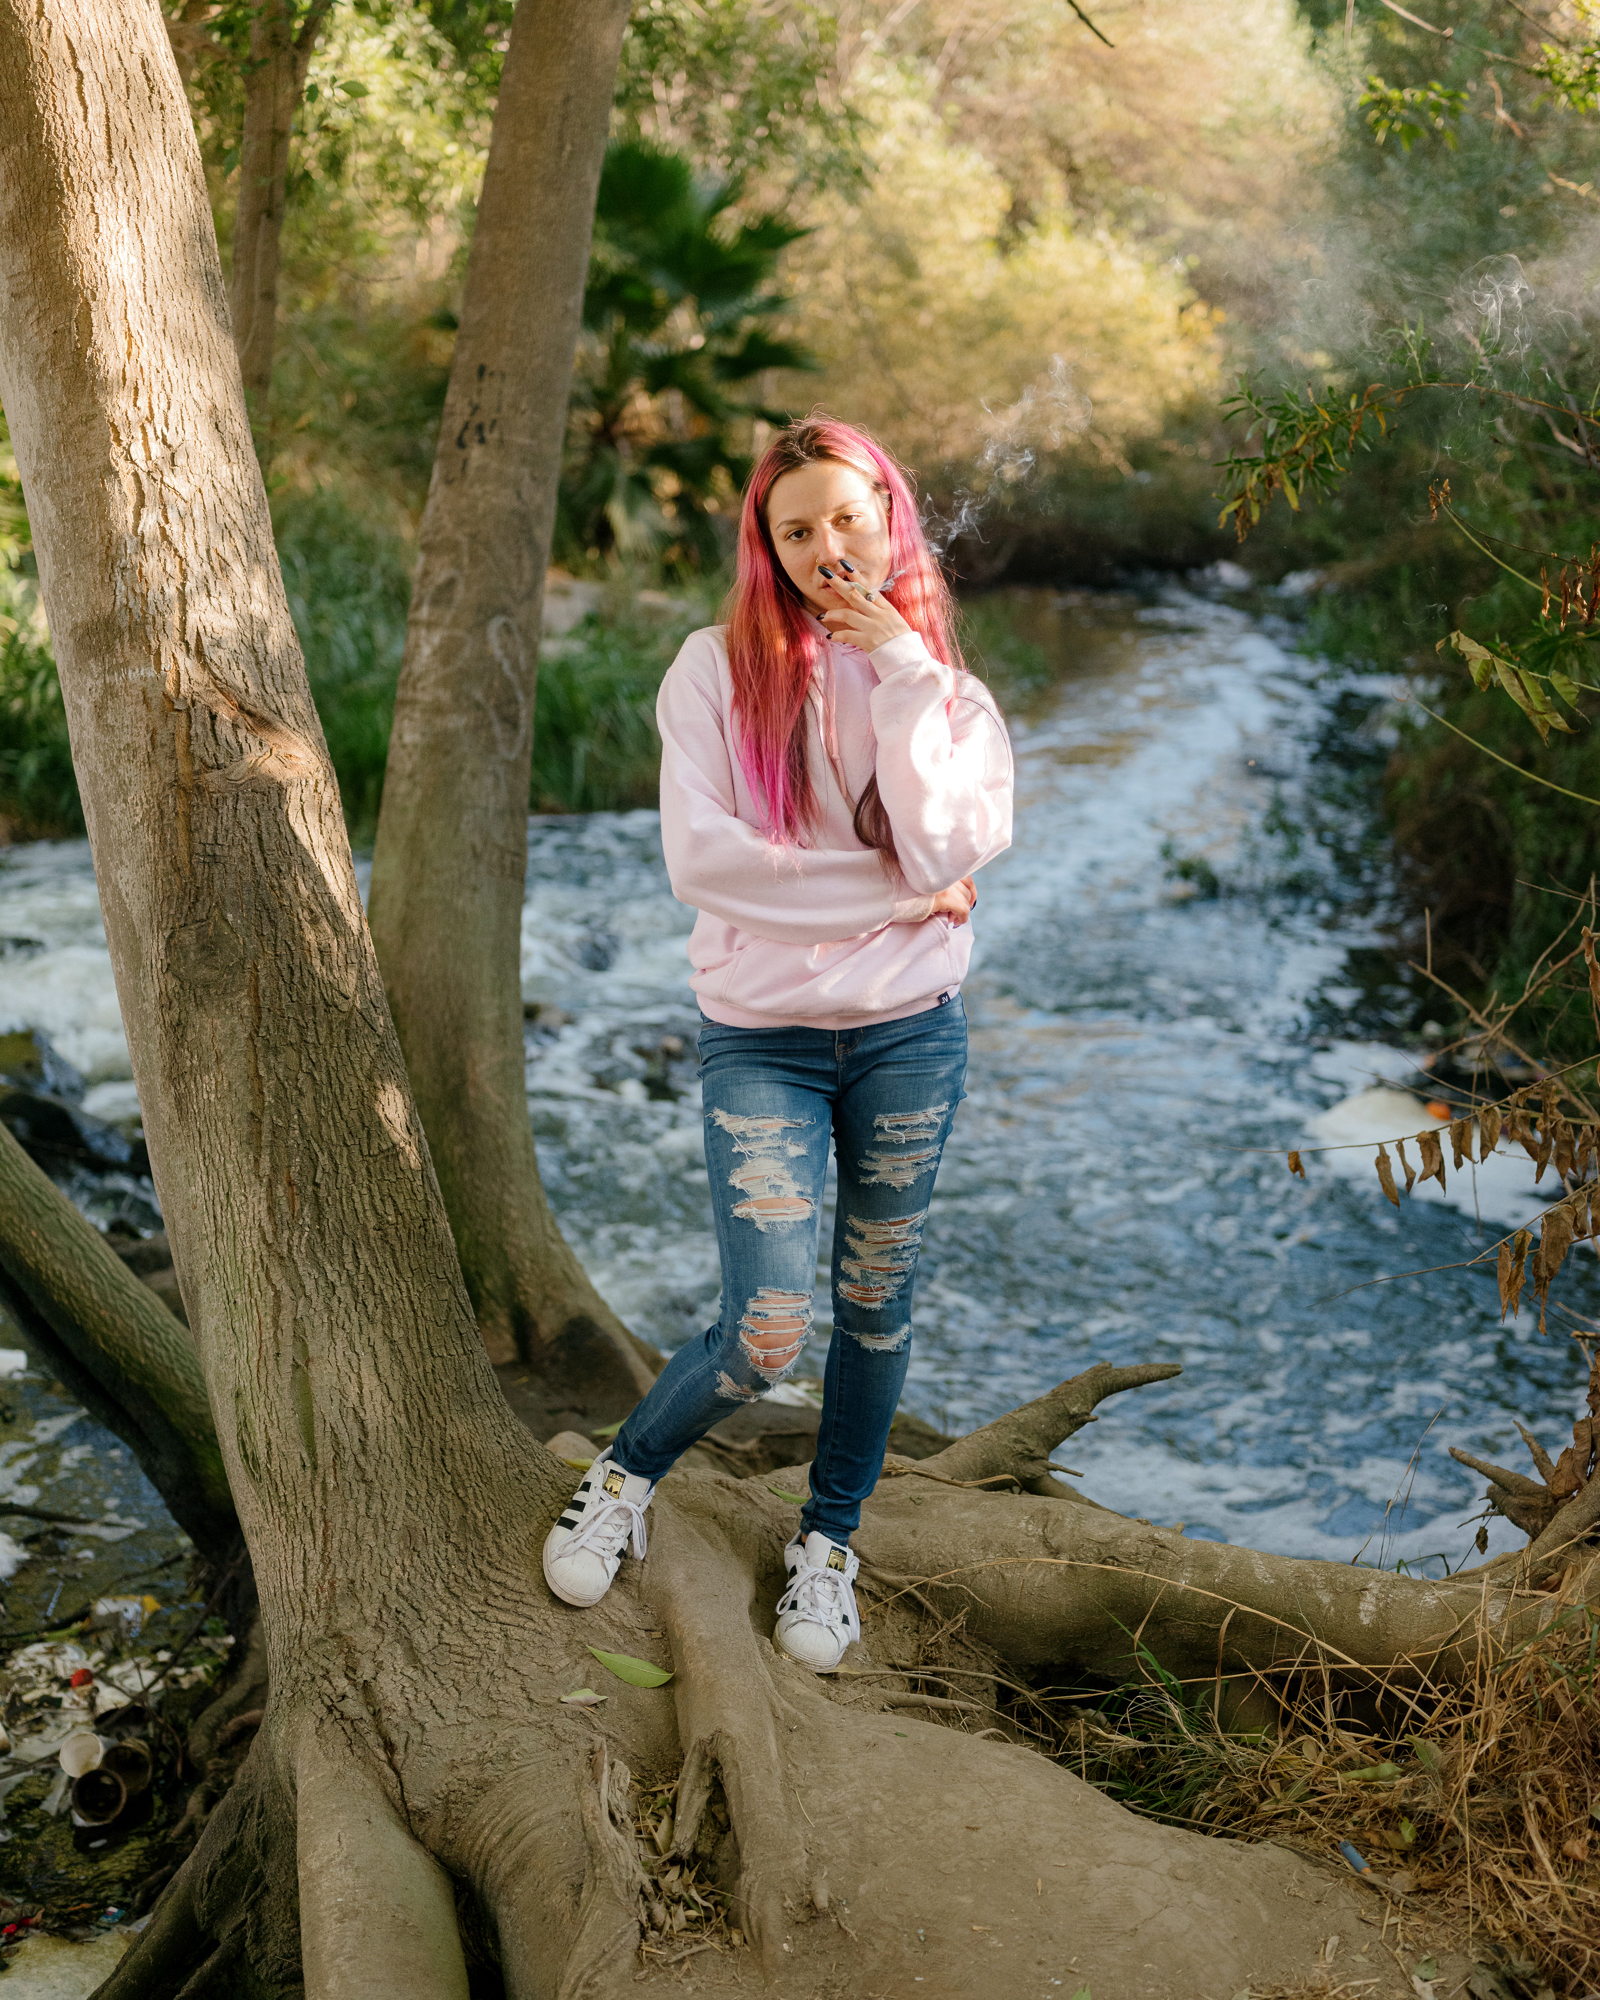 Angelina at her favorite place to smoke a joint - Sepulveda Basin, 2020